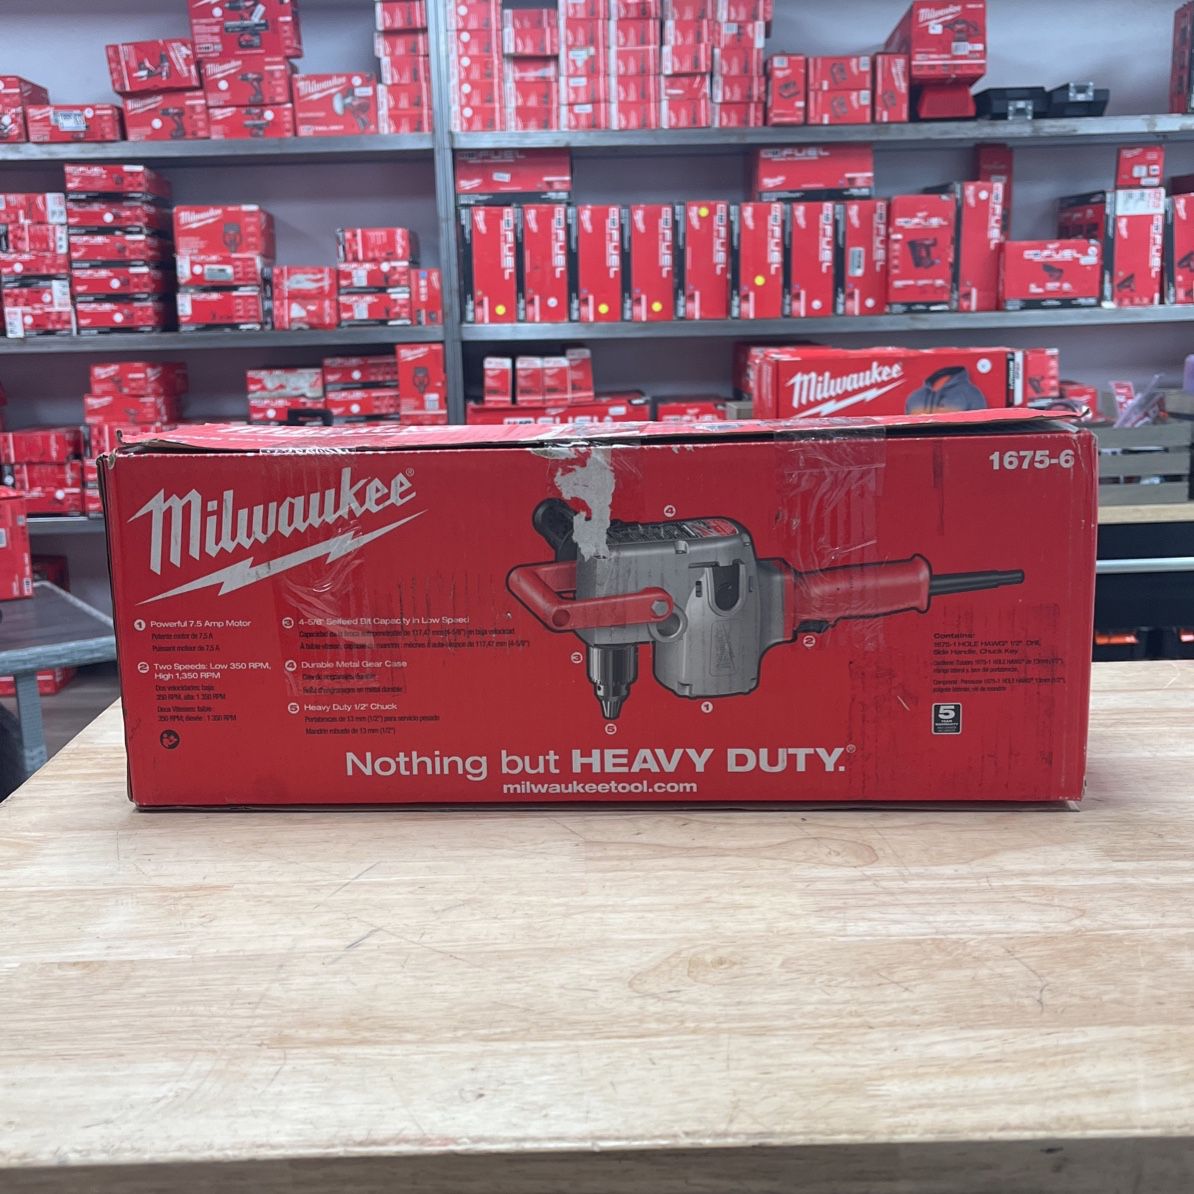 Milwaukee 7.5 Amp 1/2 in. Hole Hawg Heavy-Duty Corded Drill